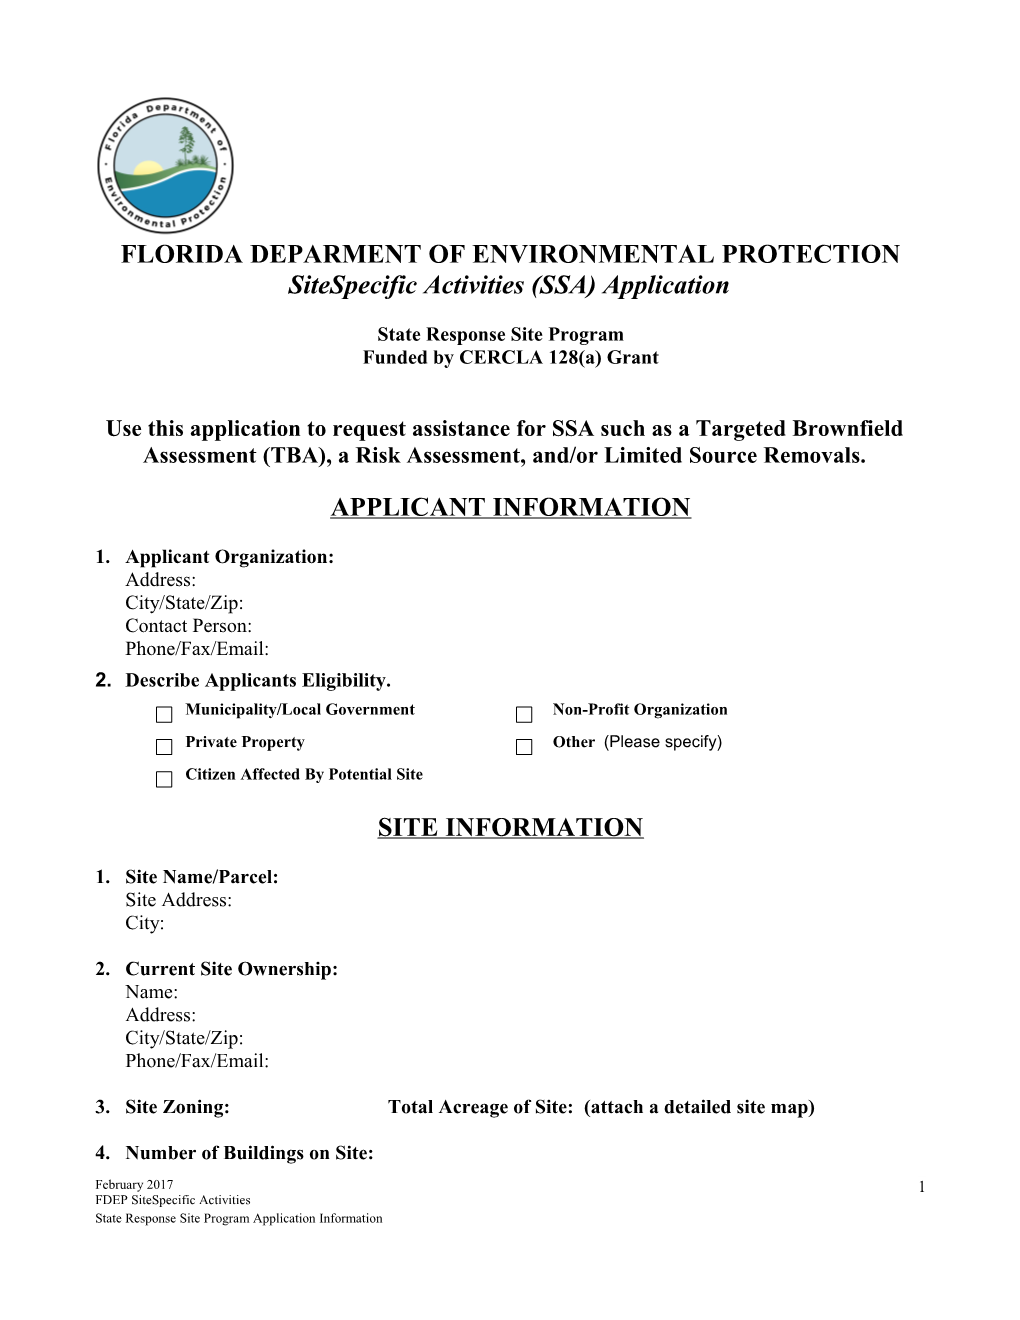 Site-Specific Activities (SSA) Application State Response Site Program - Brownfield - Florida